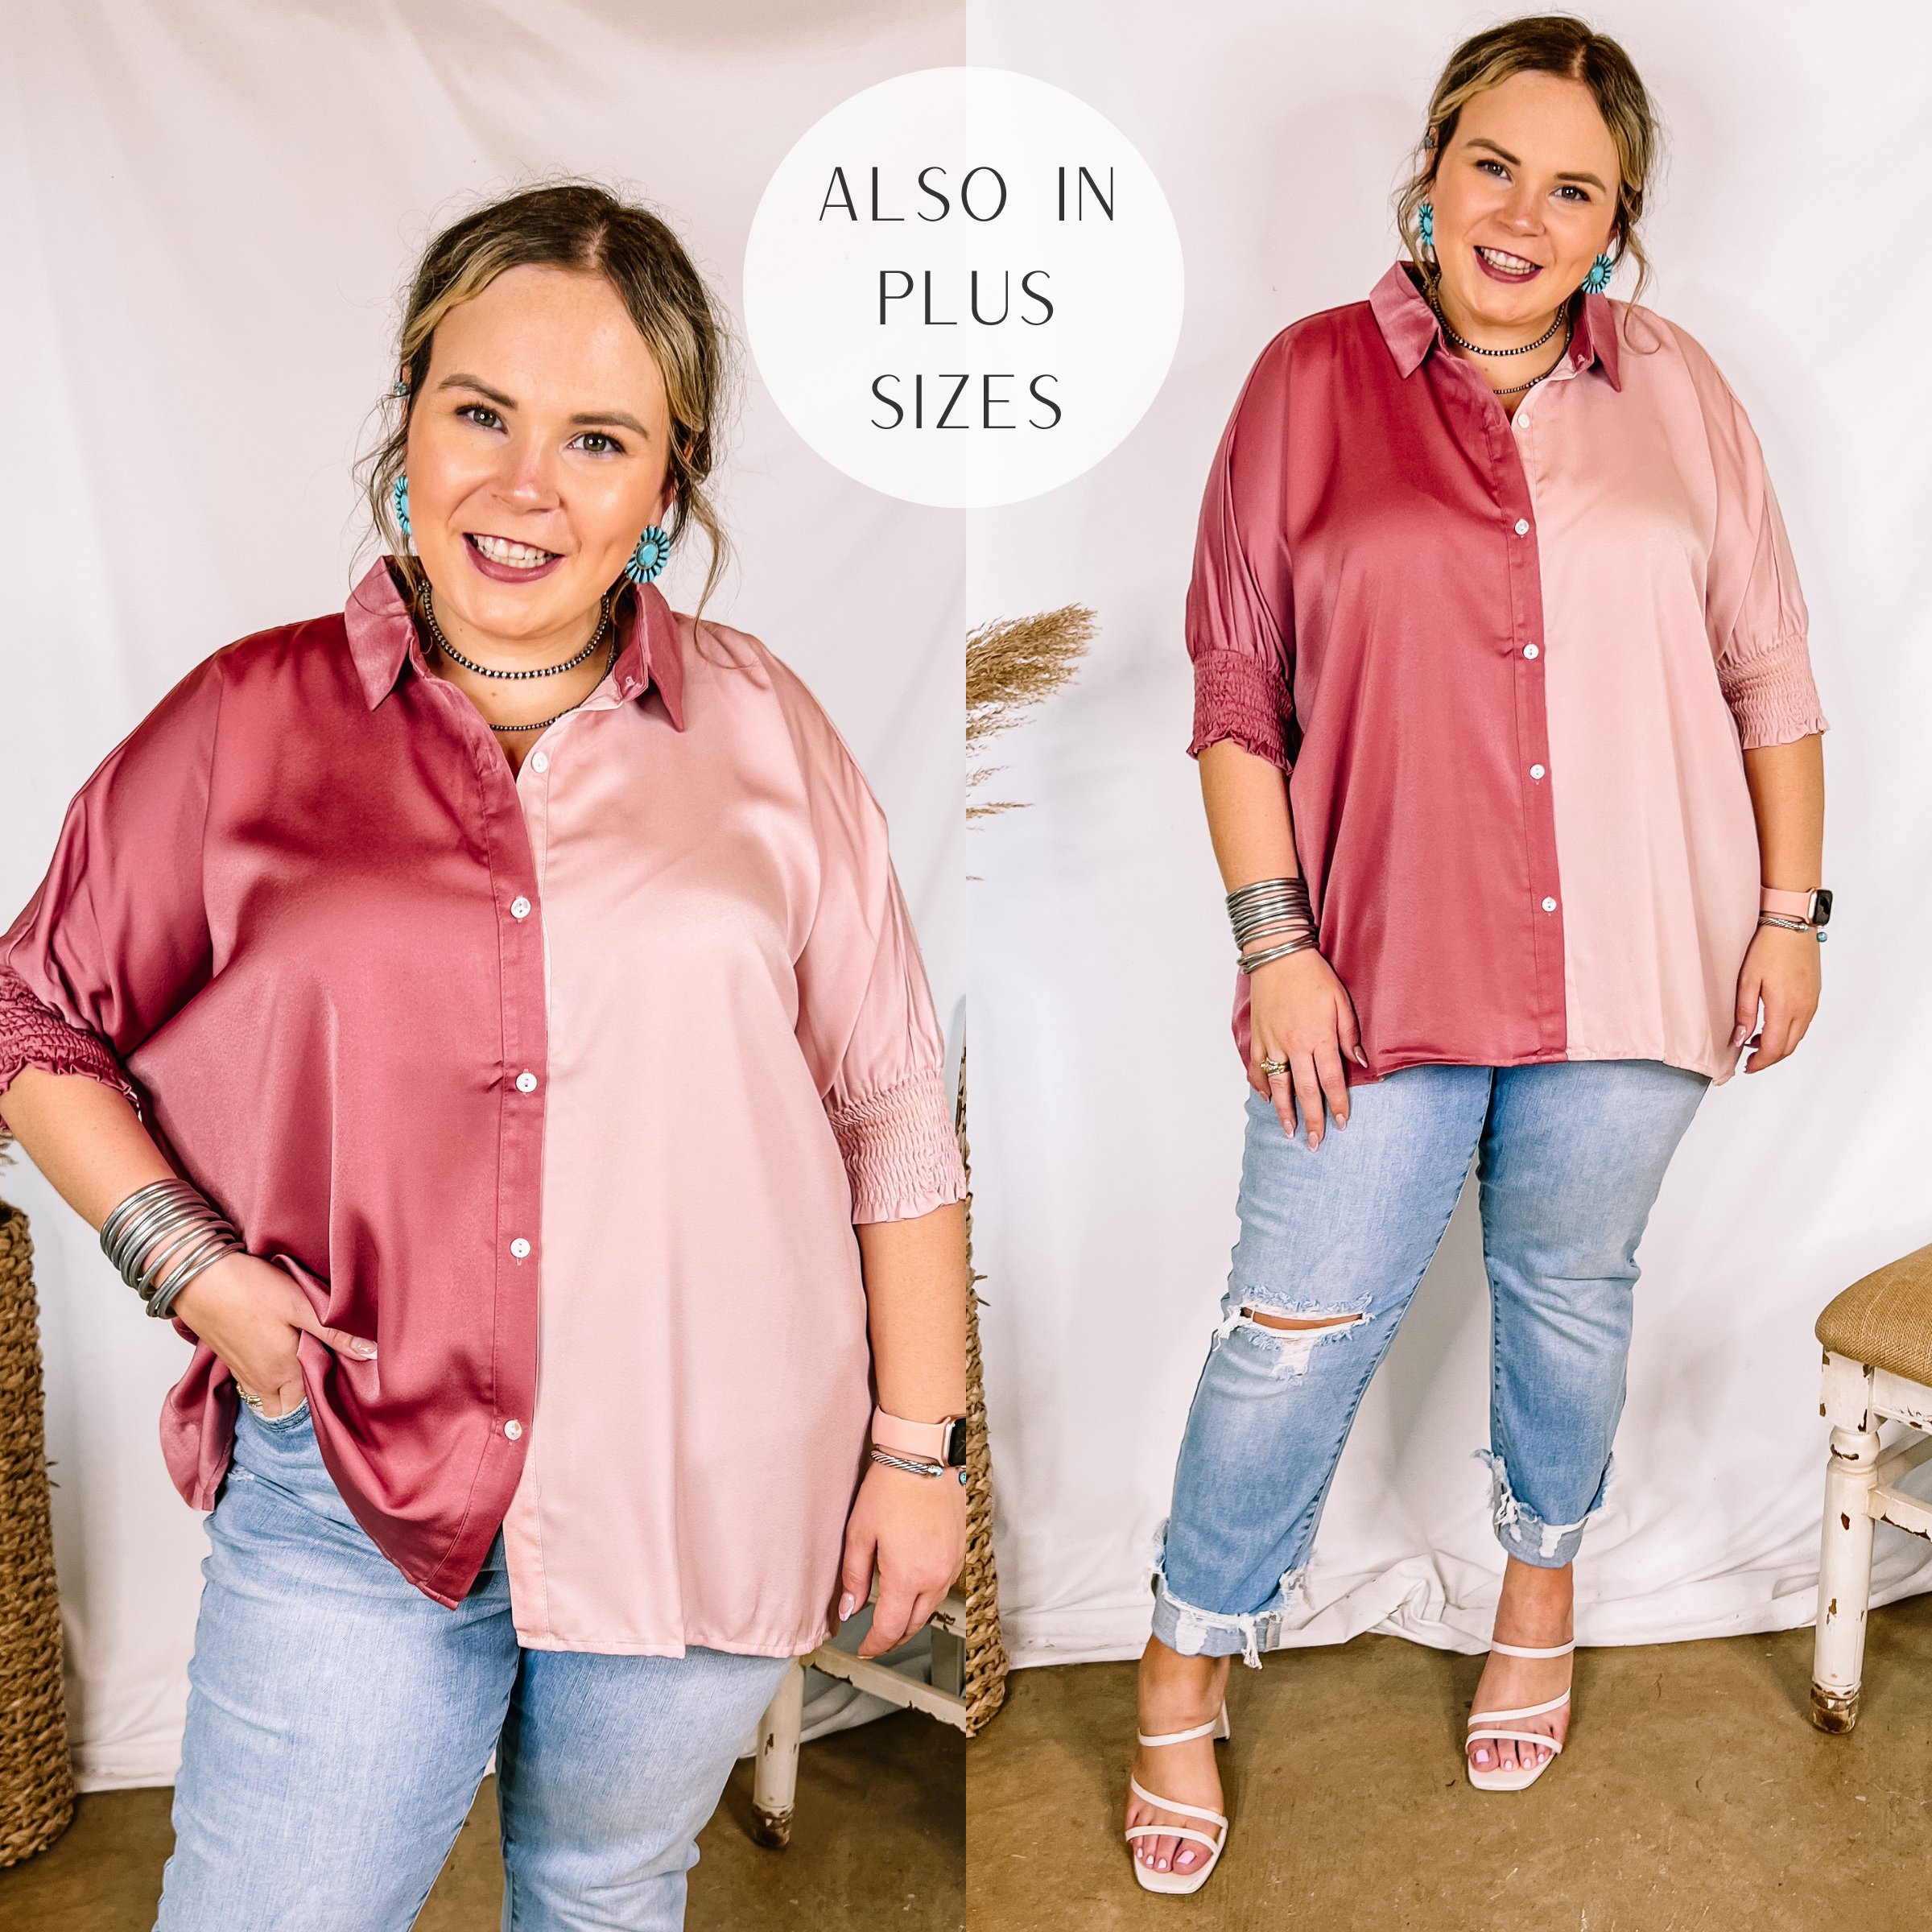 Model is wearing a color block top that is half mauve and half blush pink. This top has a button up front and collared neckline. Model has it paired with distressed boyfriend jeans, white strappy heels, and sterling silver jewelry.